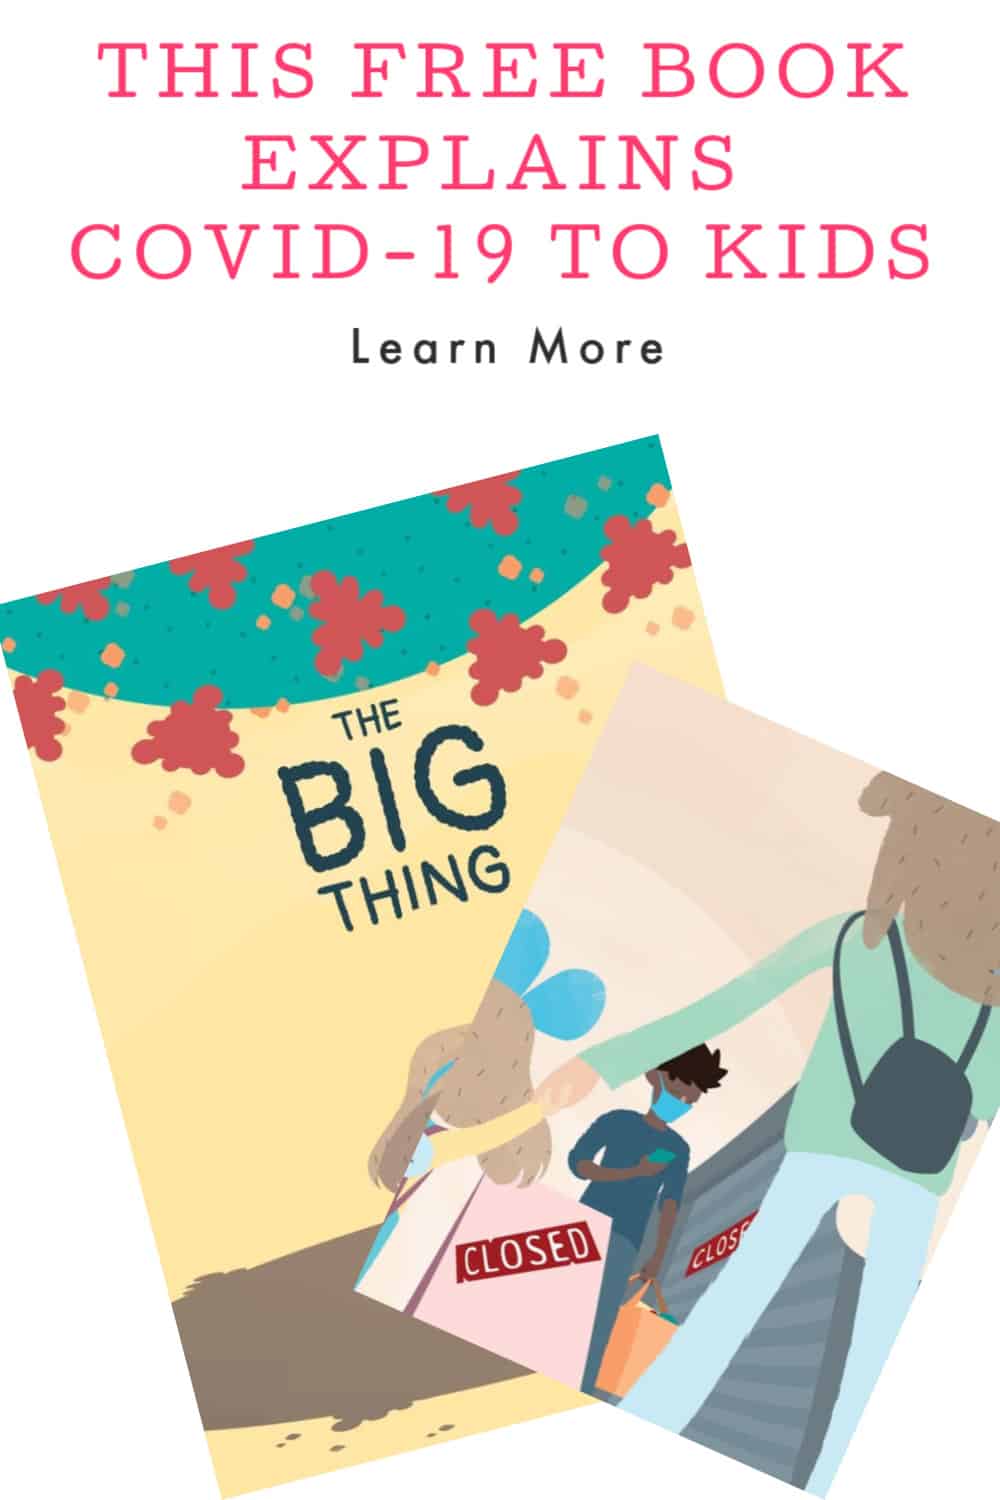 If you're looking for a simple way to explain COVID-19 to young children, The Big Thing is a great way to go. Learn more about the multinational team behind it, then grab your free copy.